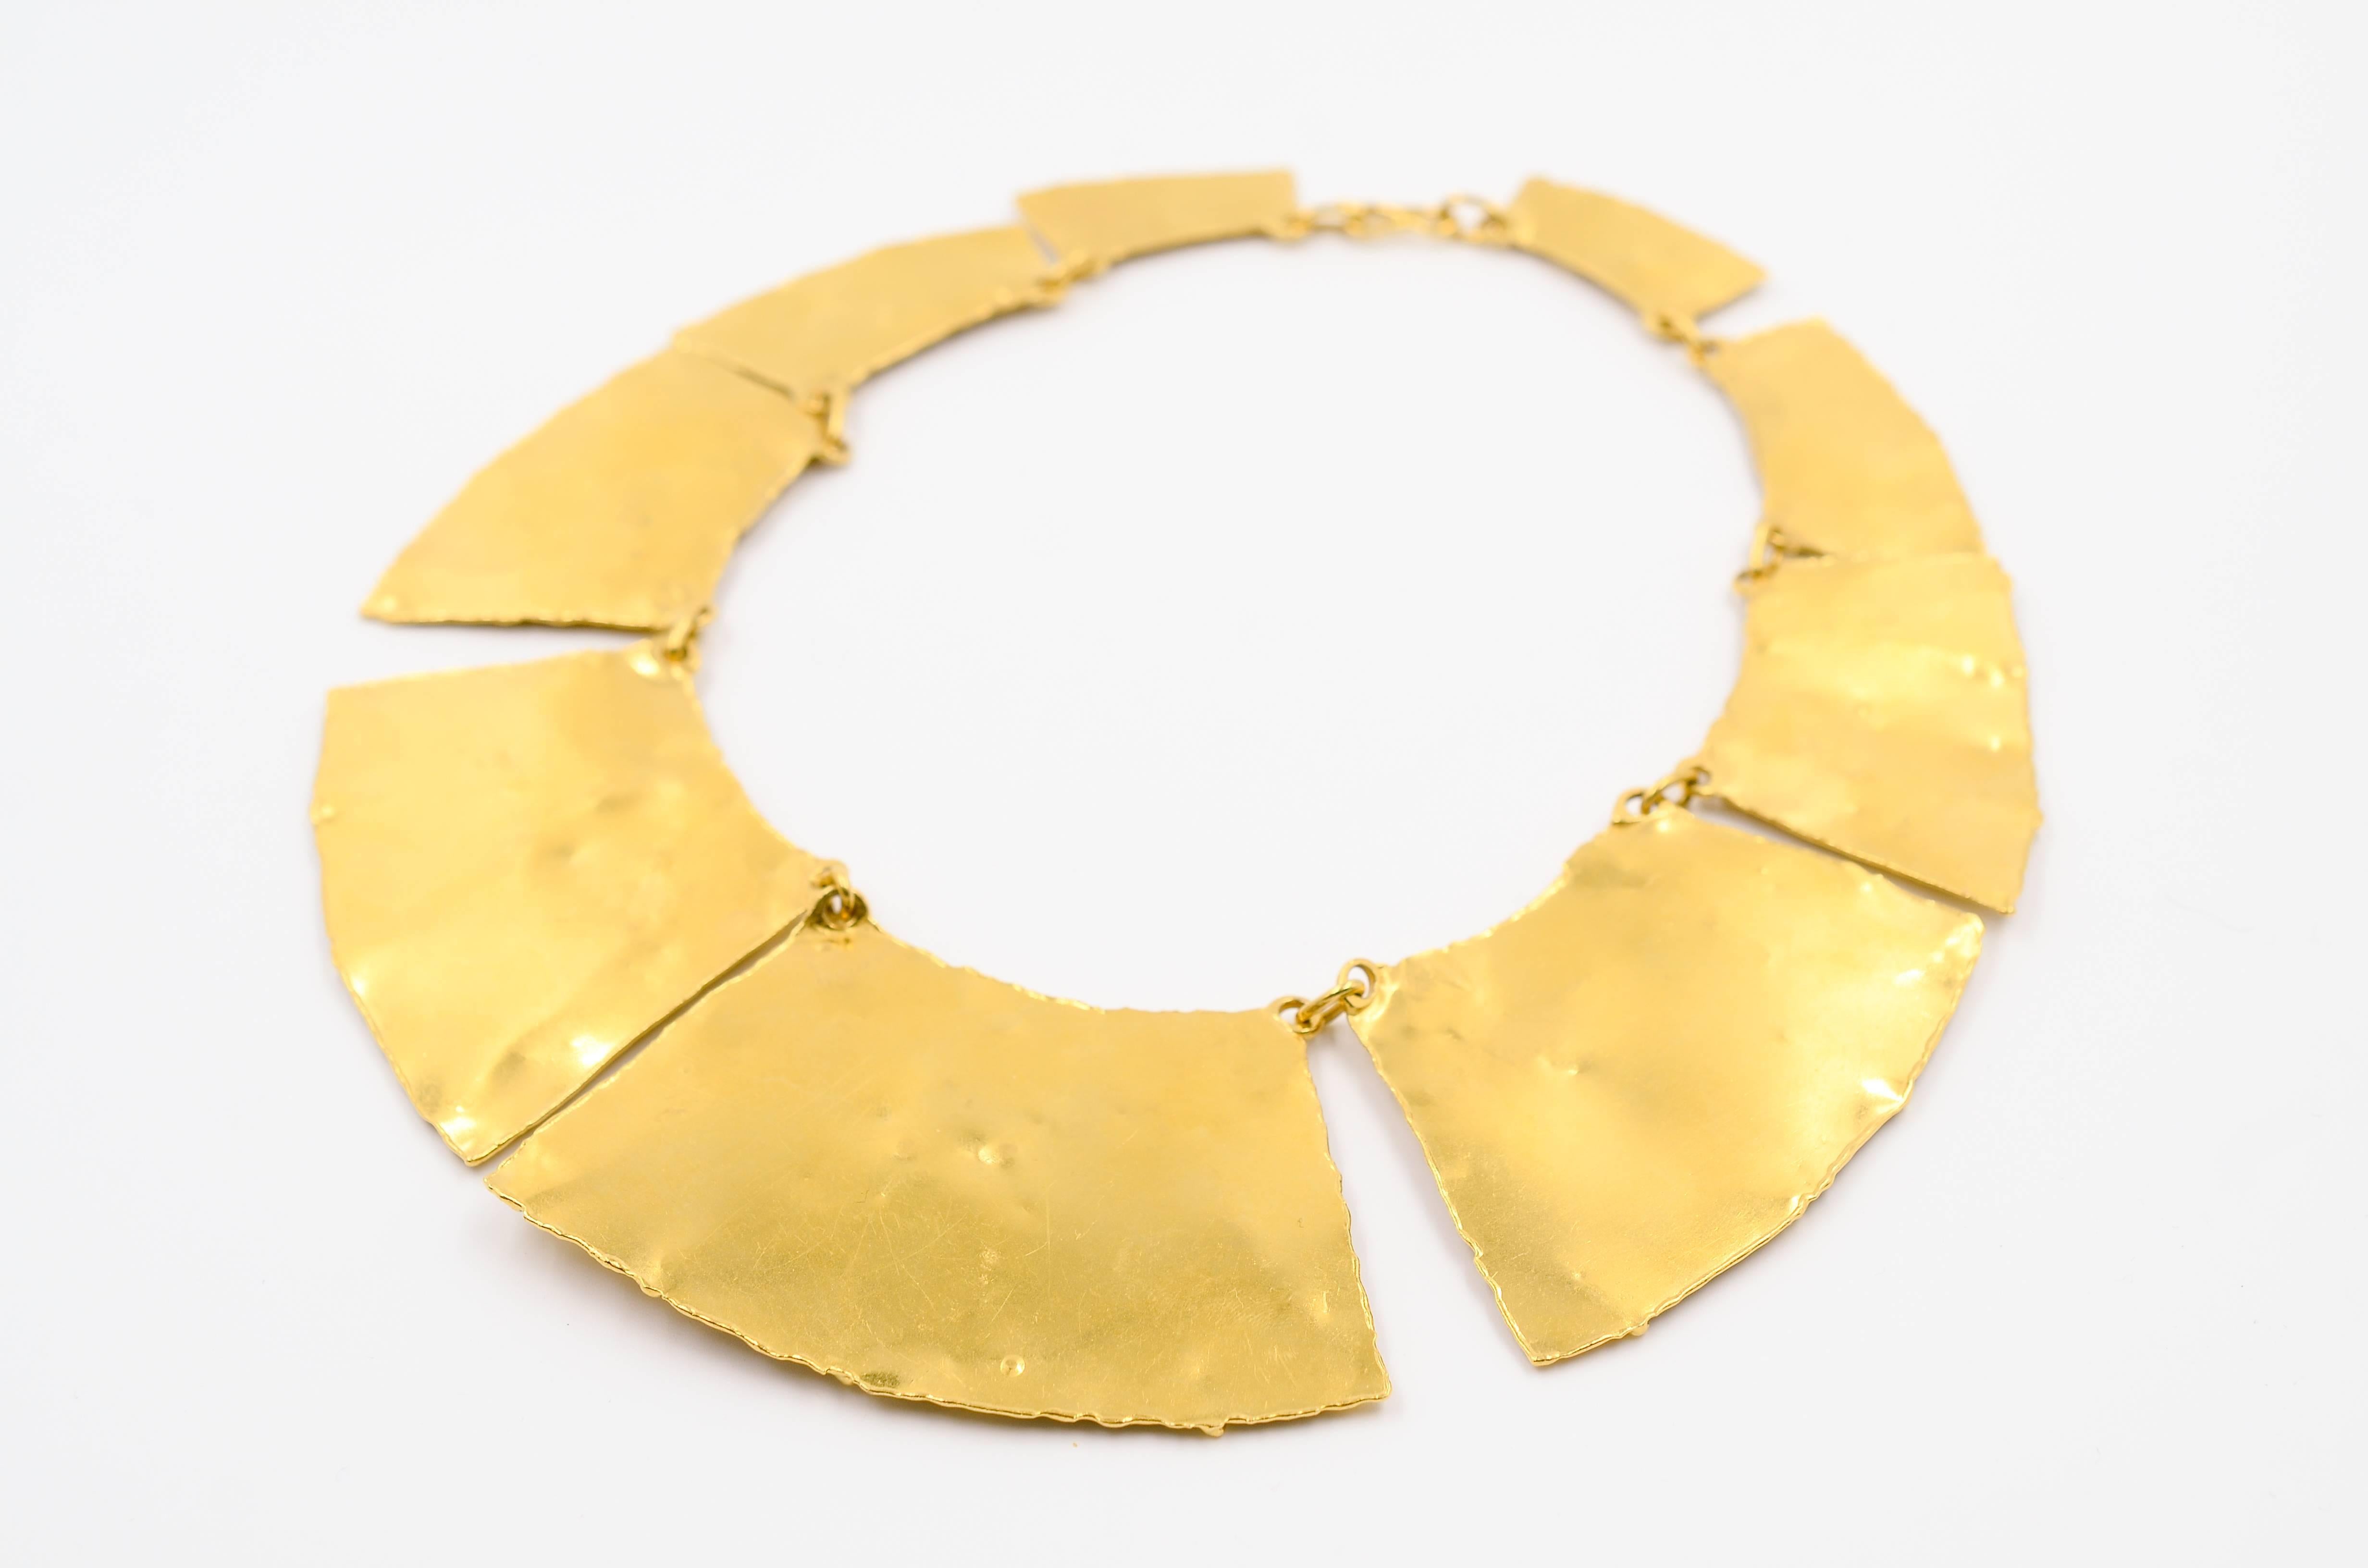 Brand: Jean Mahie

Style: 9 Link Gold Collar Necklace.

Metal: 22k Yellow Gold

Hallmarked: 22k Jean Mahie

Weight: 244 grams

